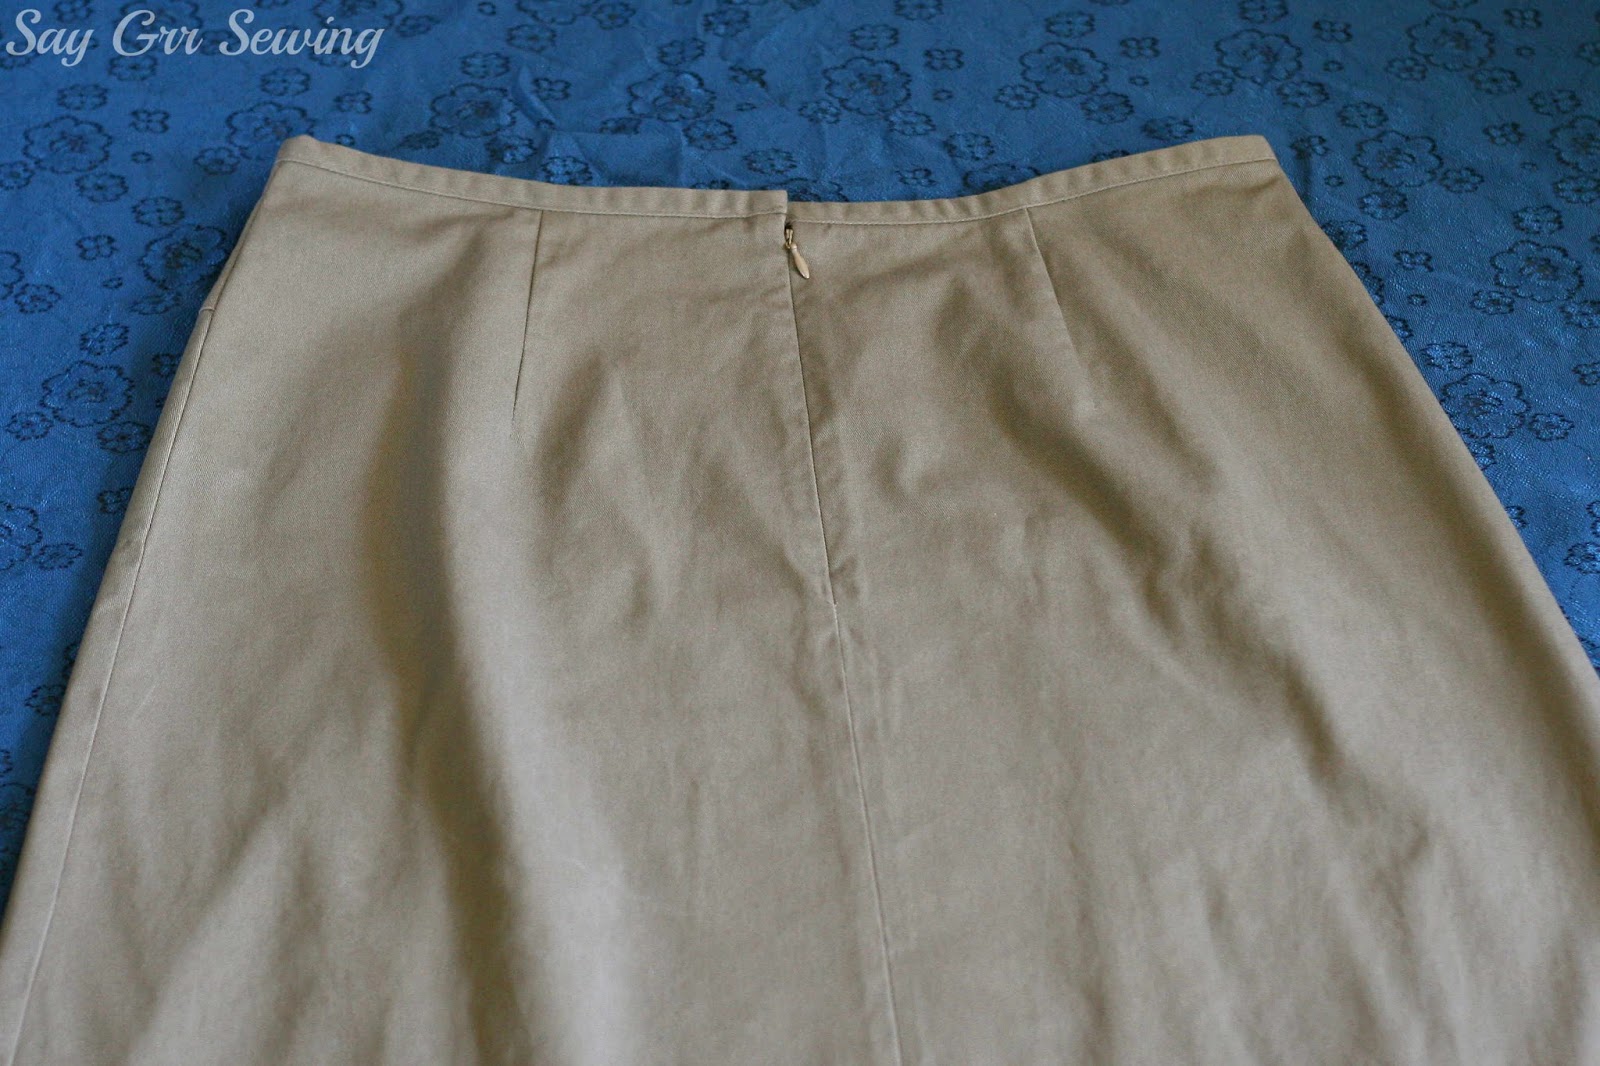 Say Grr Sewing: Arches Skirt